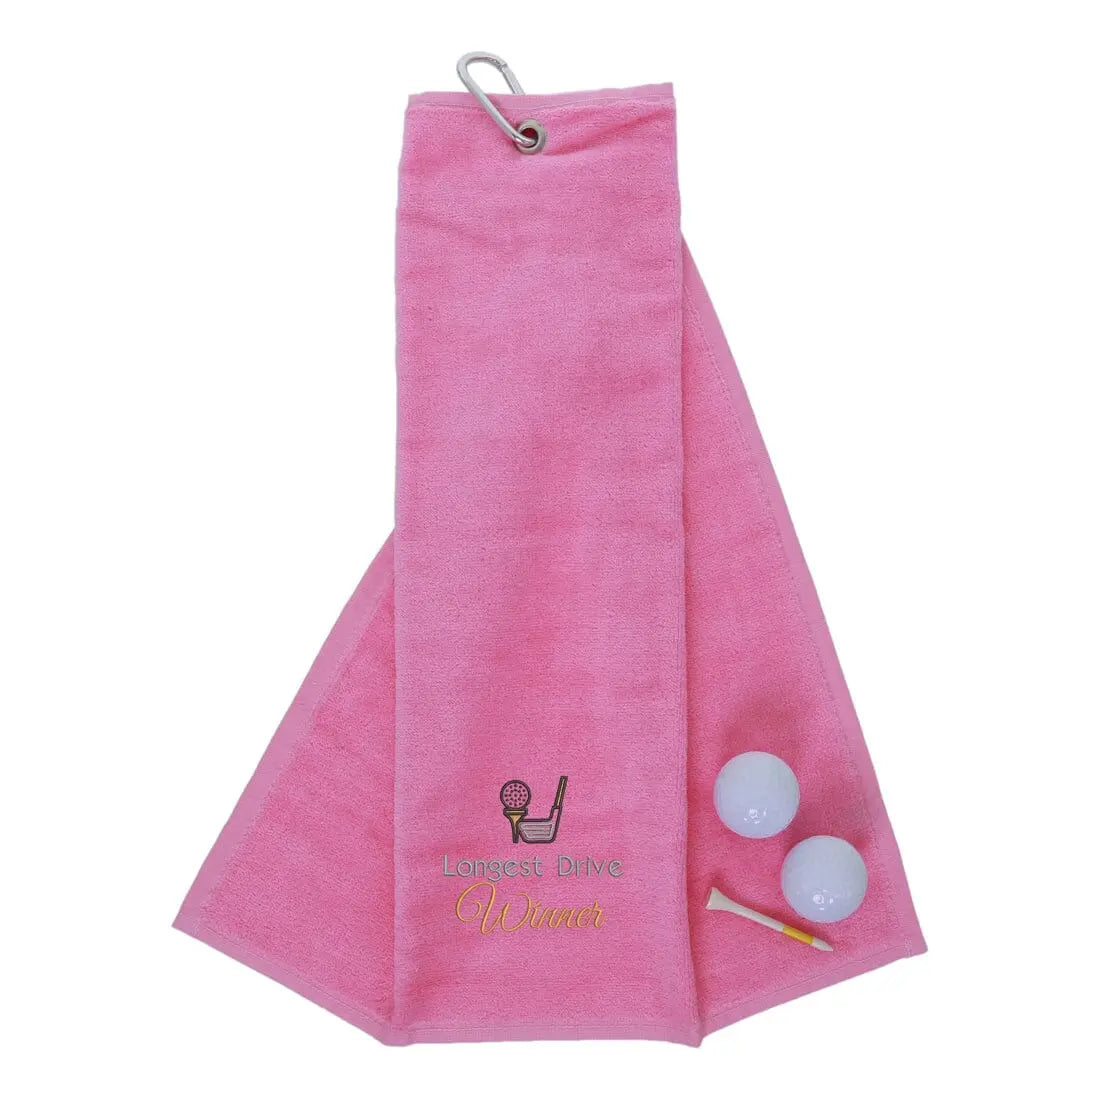 Tri-Fold Golf Towel Embroidered For Longest Drive Competition Pink  